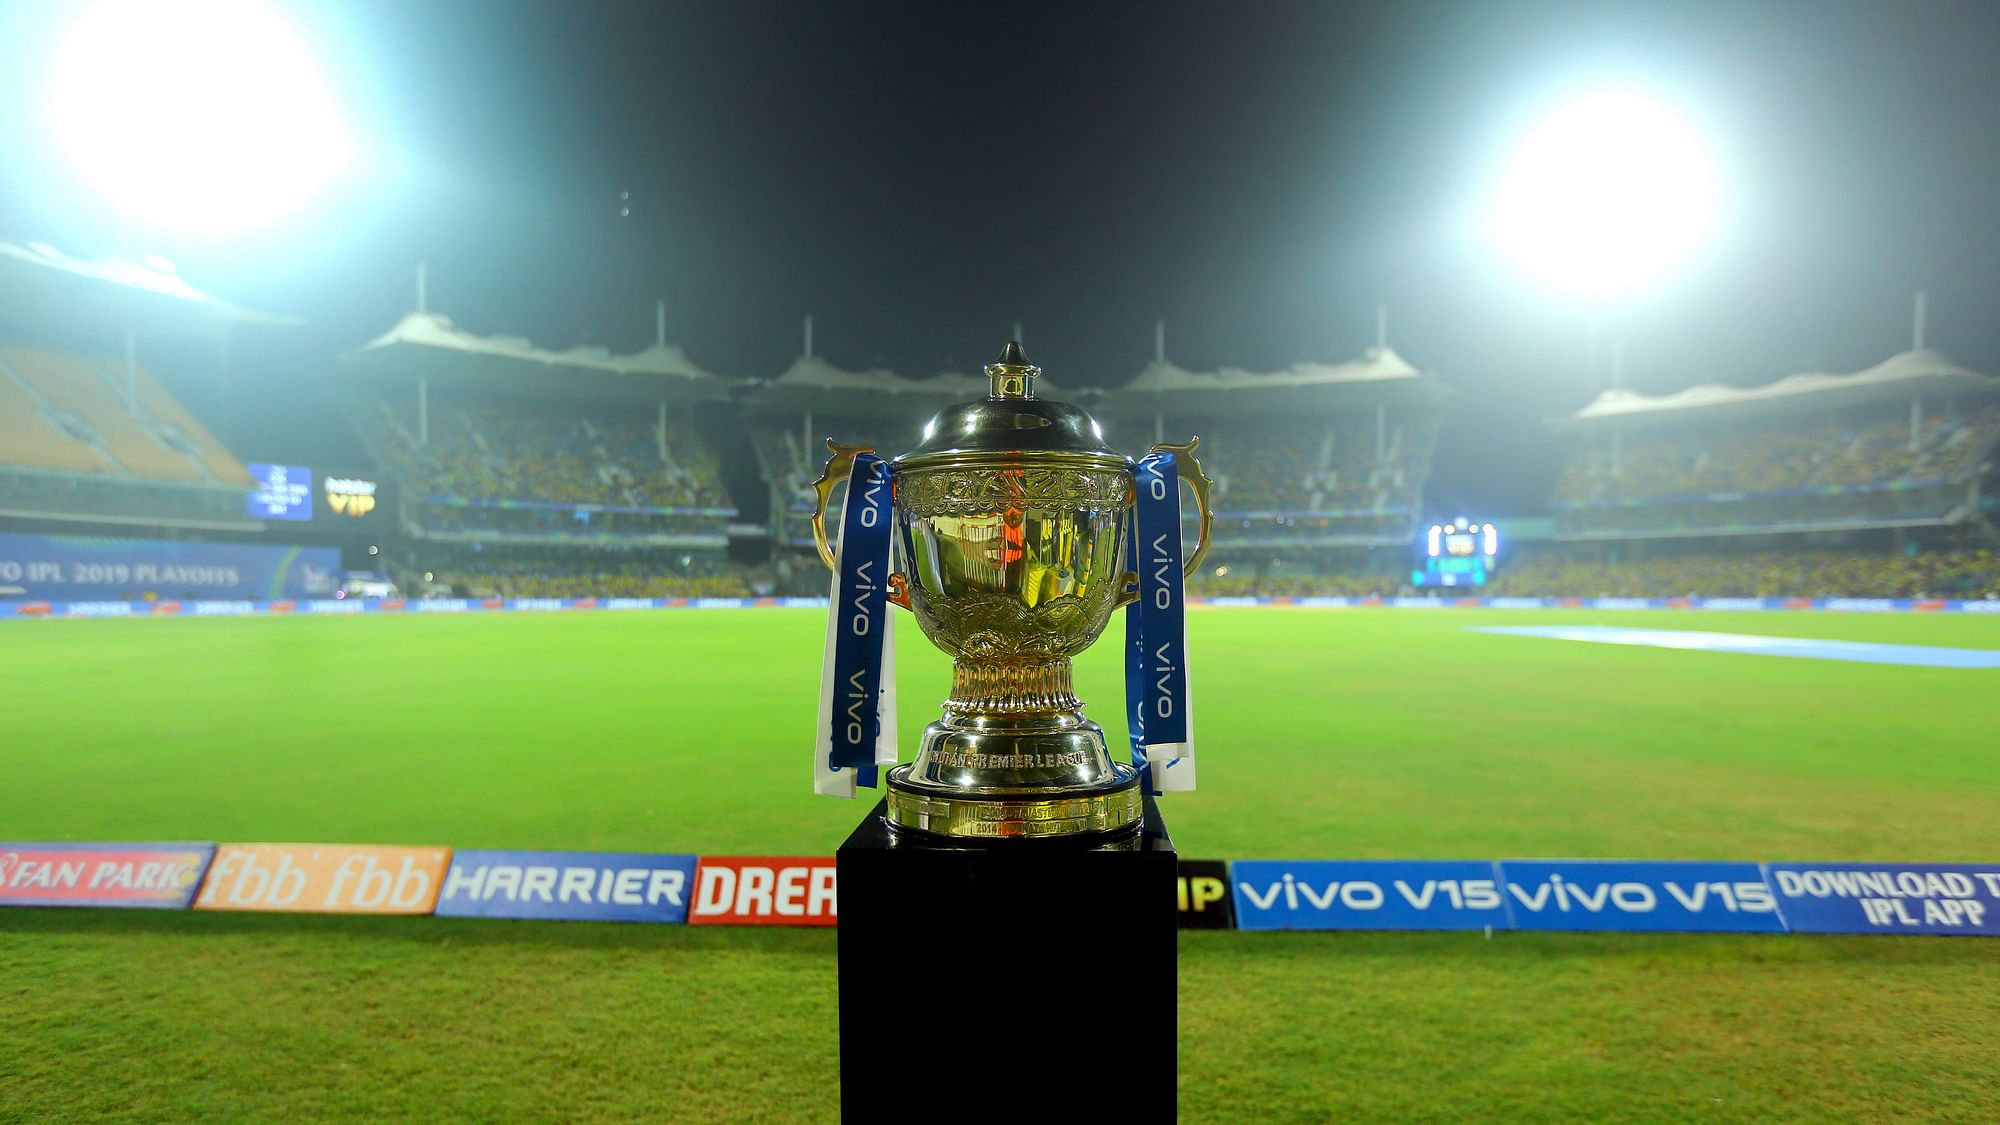 What are the chances of the 2020 IPL going ahead? What are the options ahead for the BCCI?